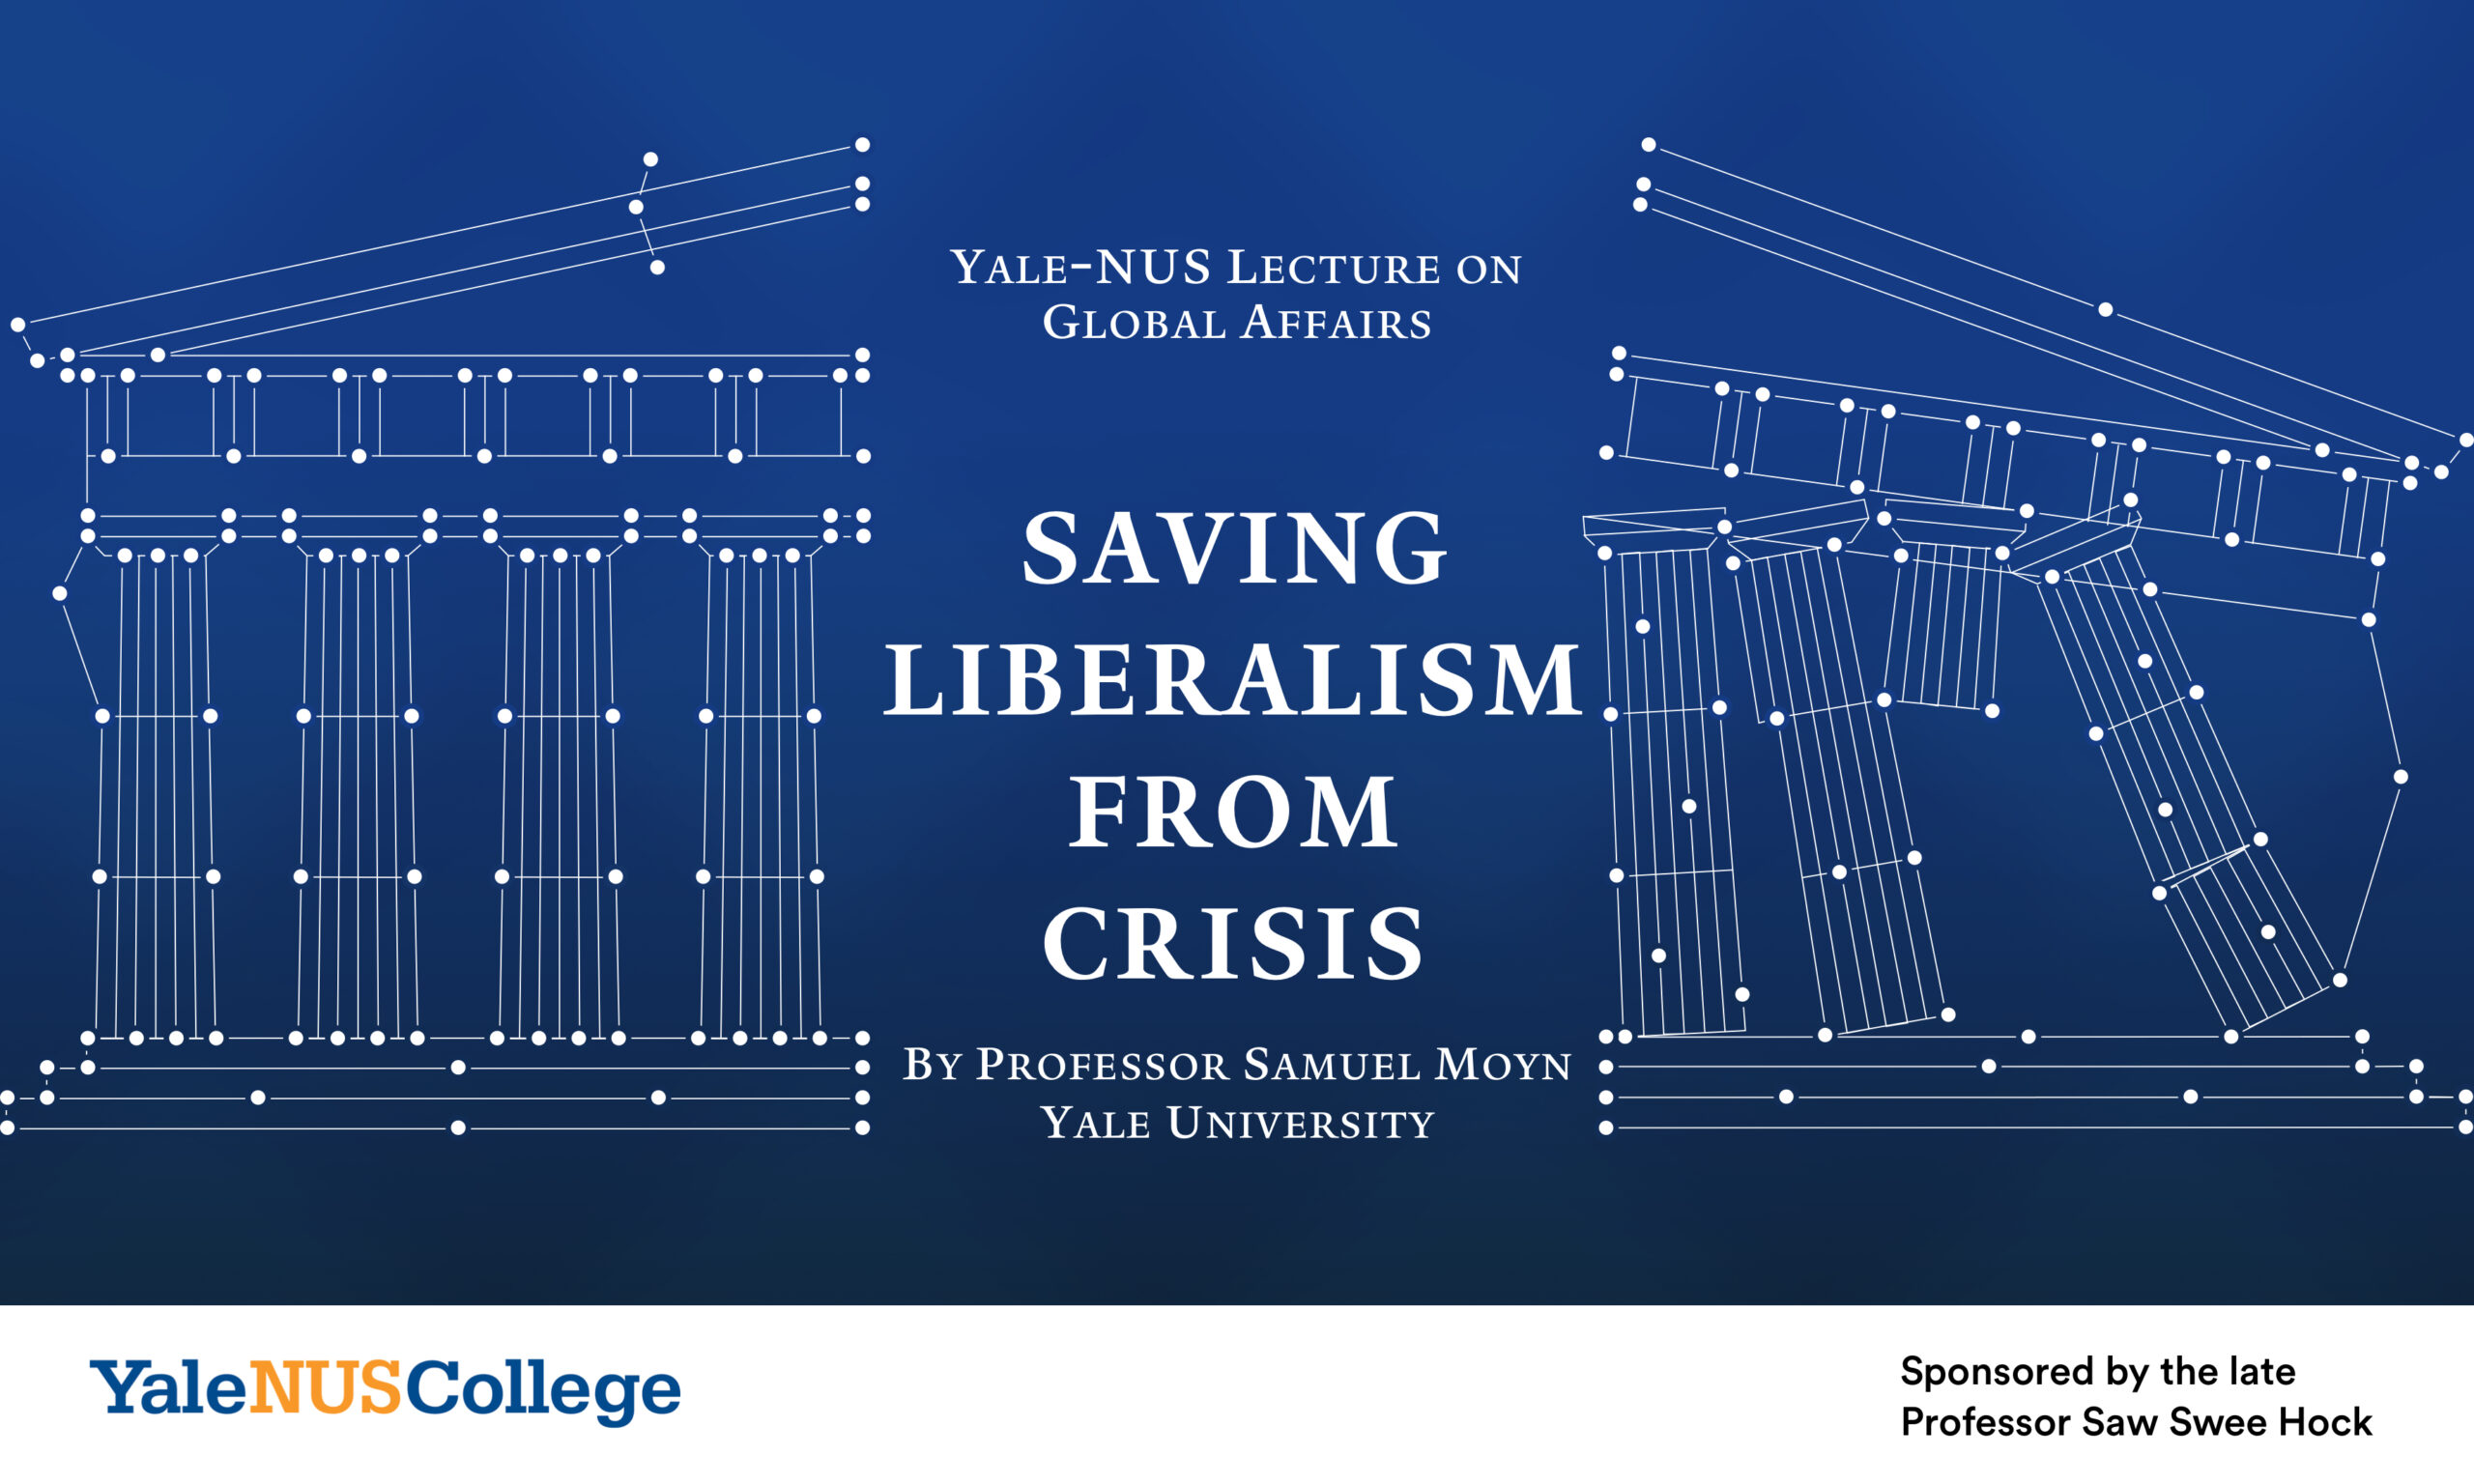 Yale-NUS Lecture on Global Affairs: Saving Liberalism from Crisis